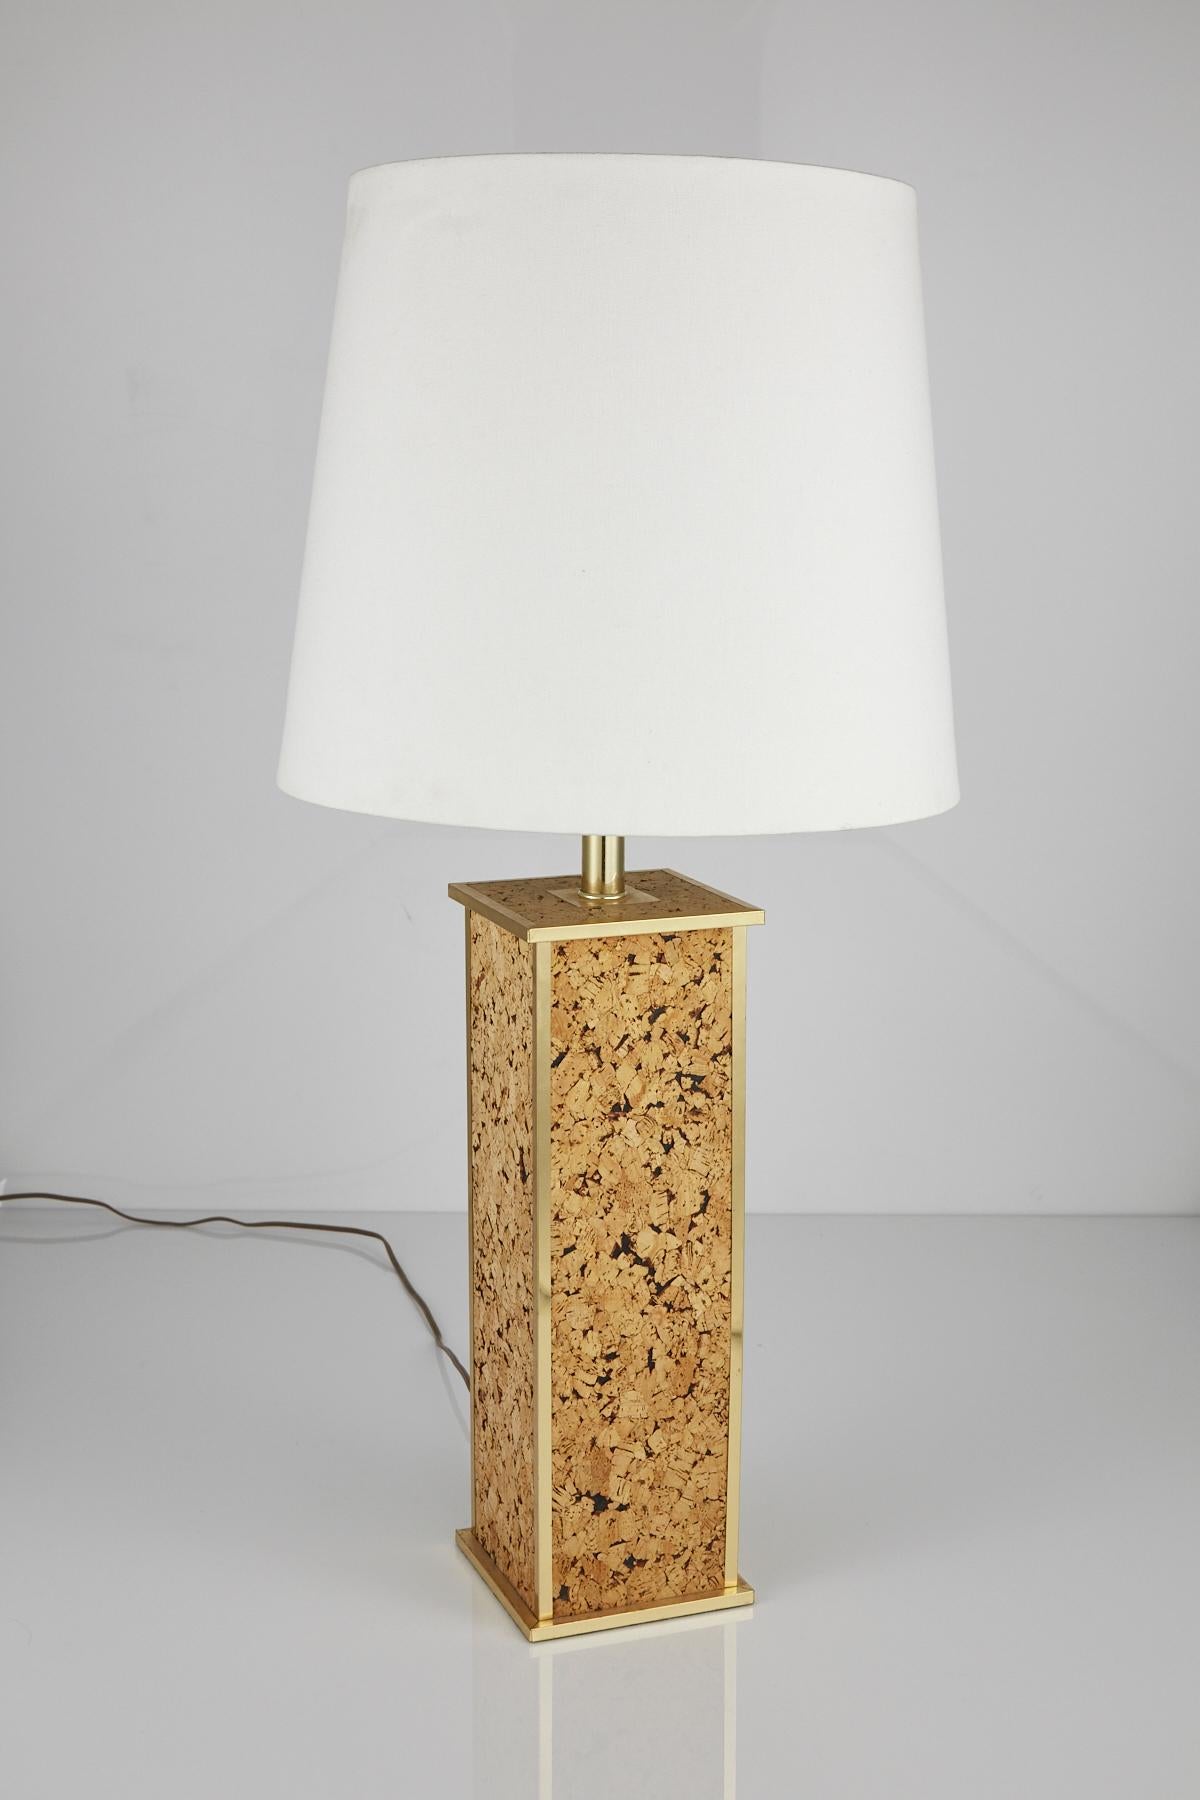 Square columnar base wrapped in cork, accented with brass trim and neck. American made, from the 1970s.

Does not come with shade or harp seen in images. Body of lamp only.